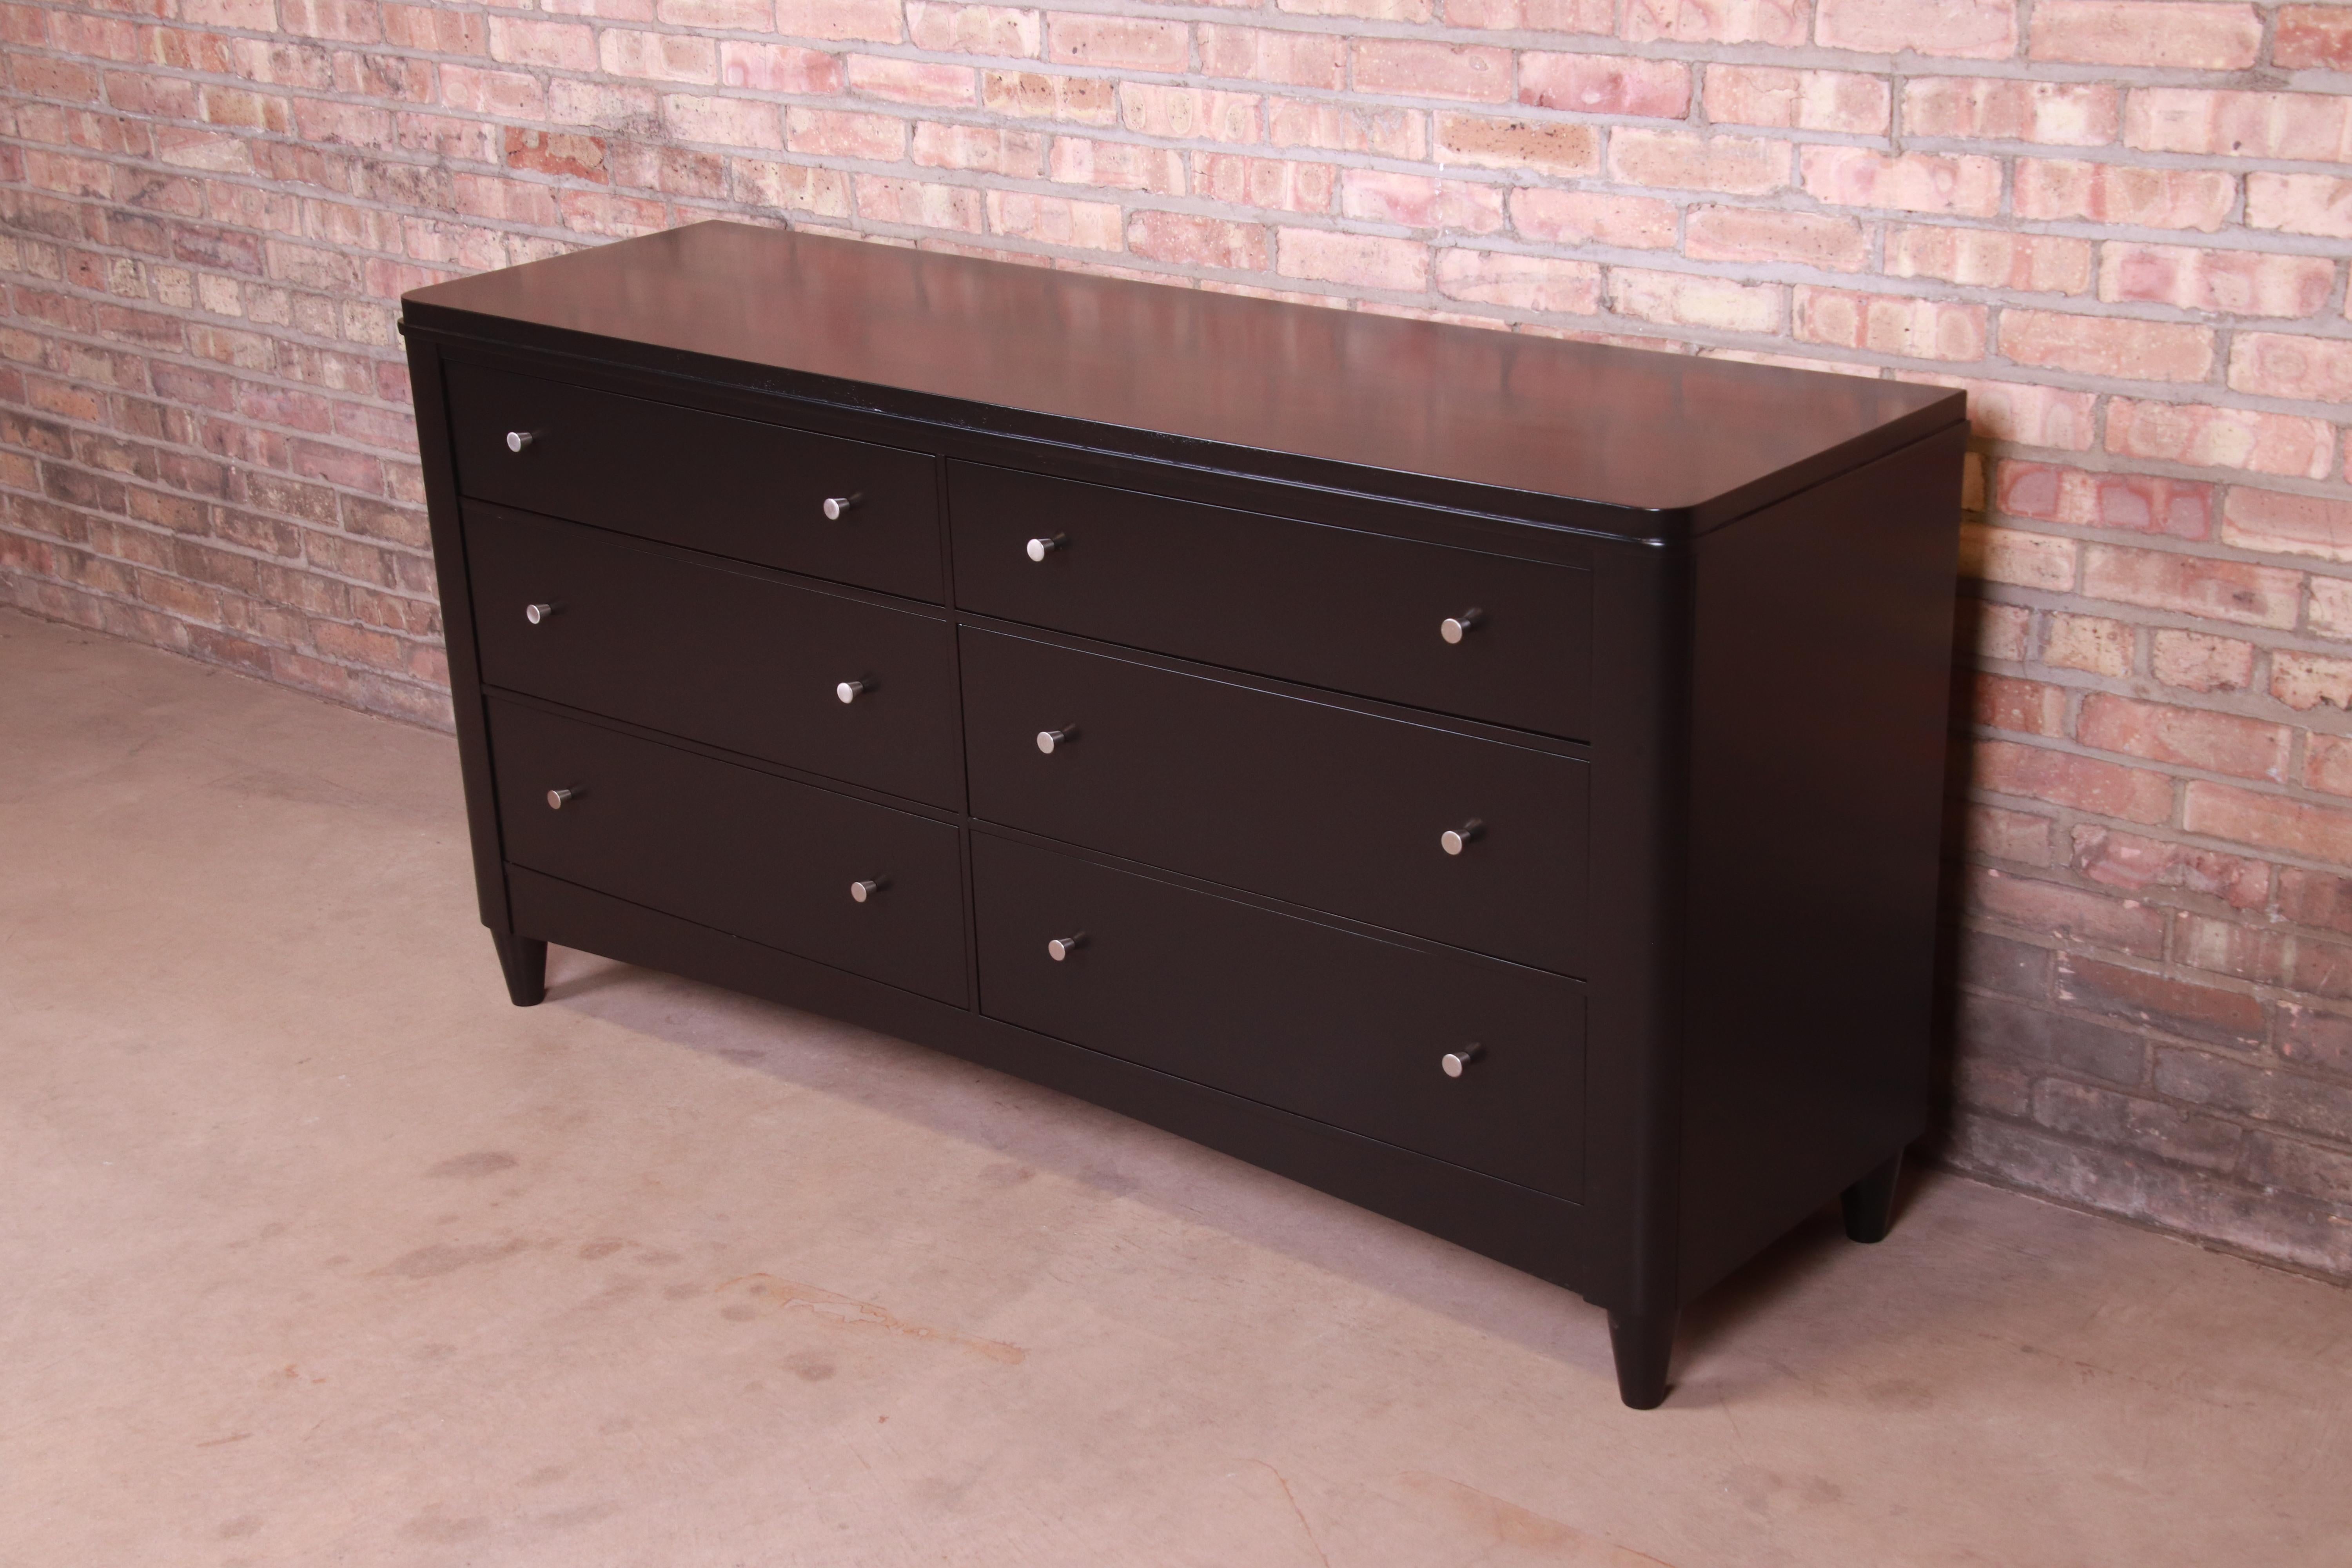 20th Century Ethan Allen Modern Black Lacquered Six-Drawer Dresser or Credenza, Refinished